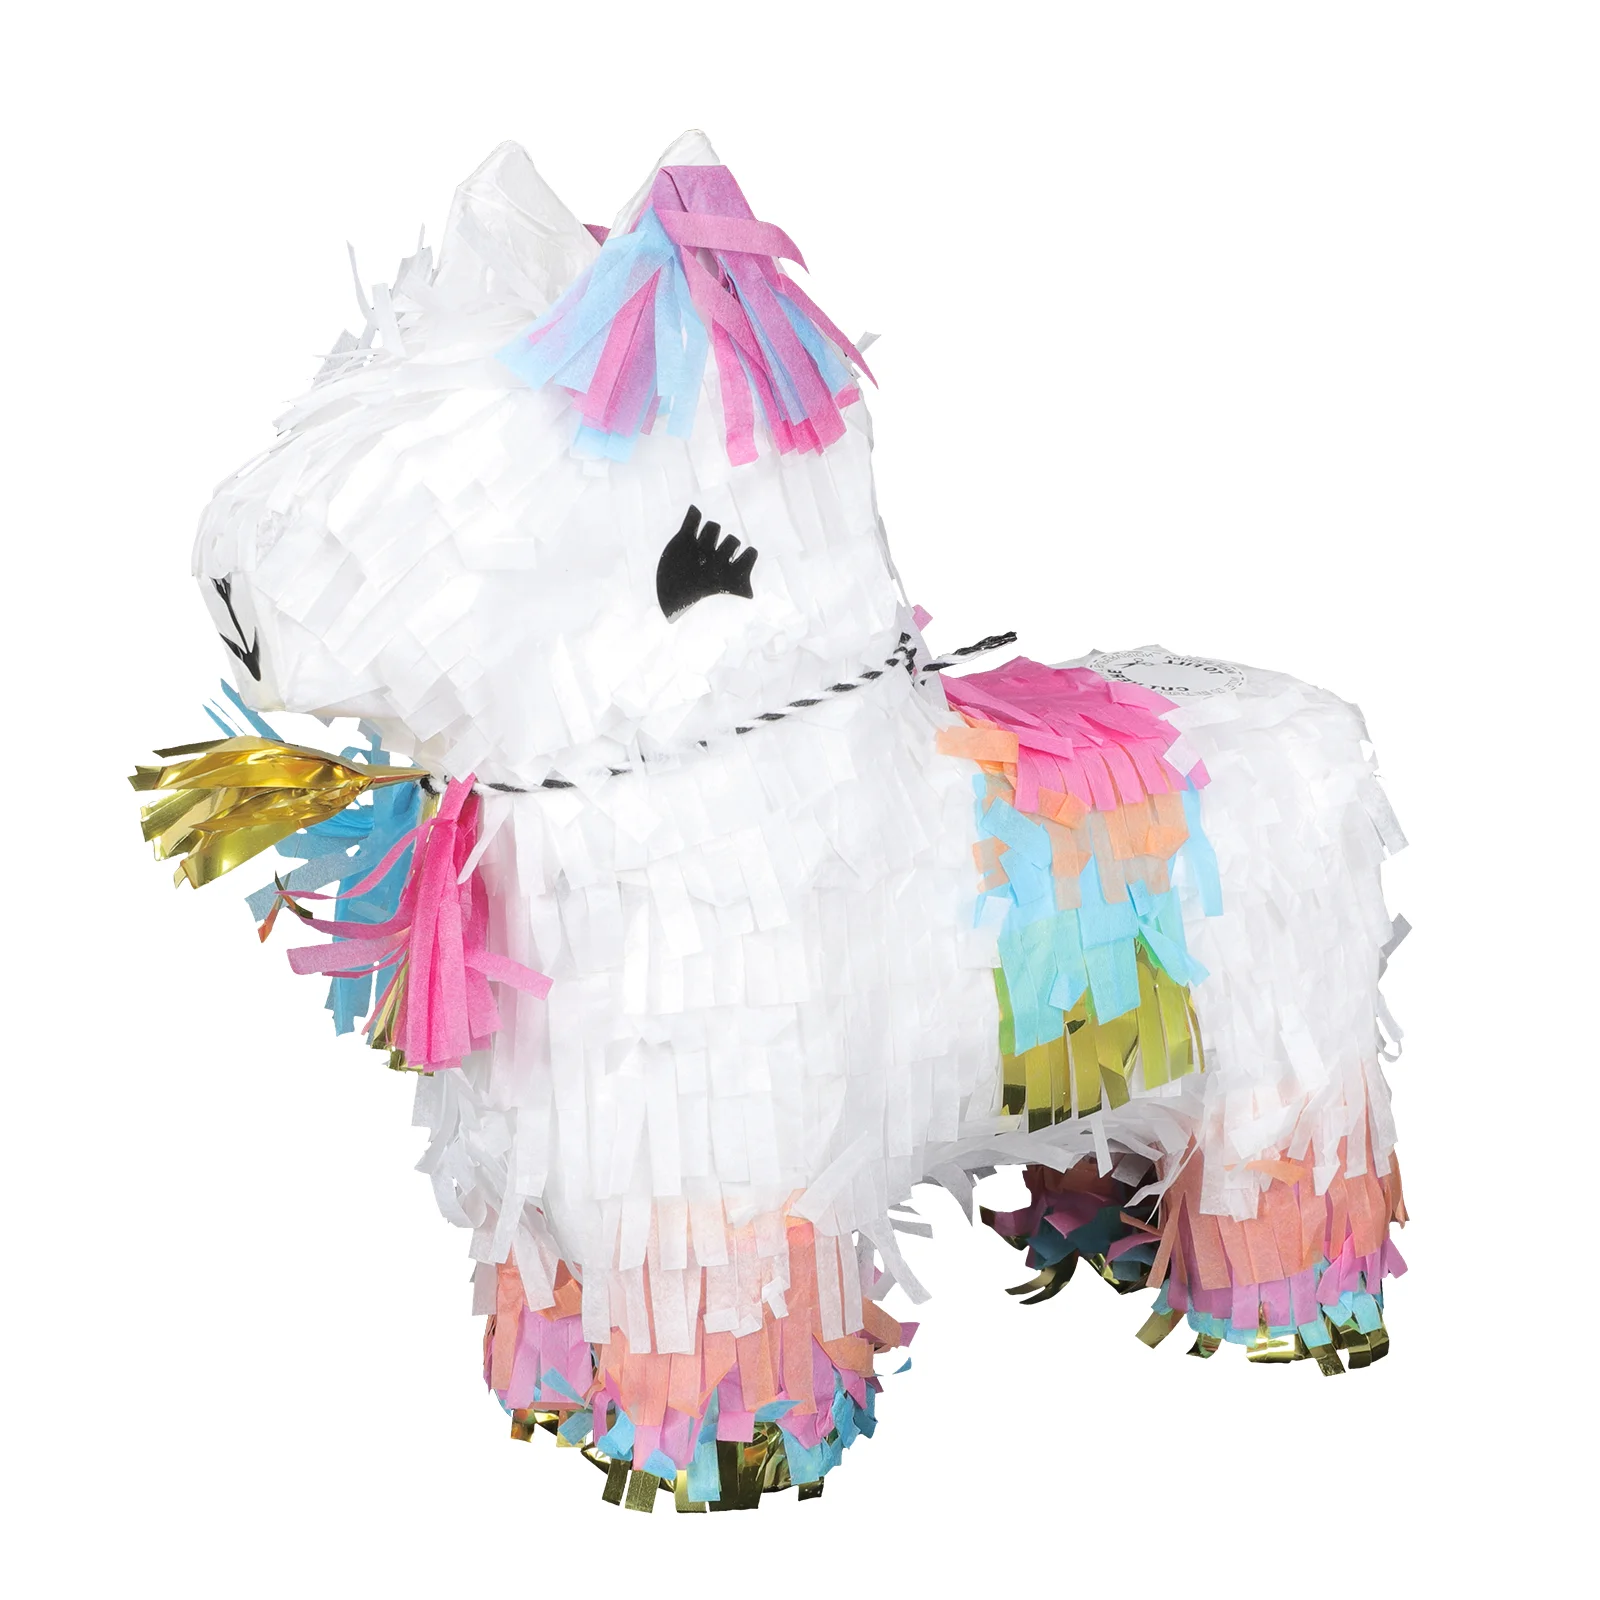 

Candy Filled Plaything Mini 3D Pony Pinata Smashed Sugar Filled Gift Box Adorable Horse Pinata Toy Party Smashing Toy Supply